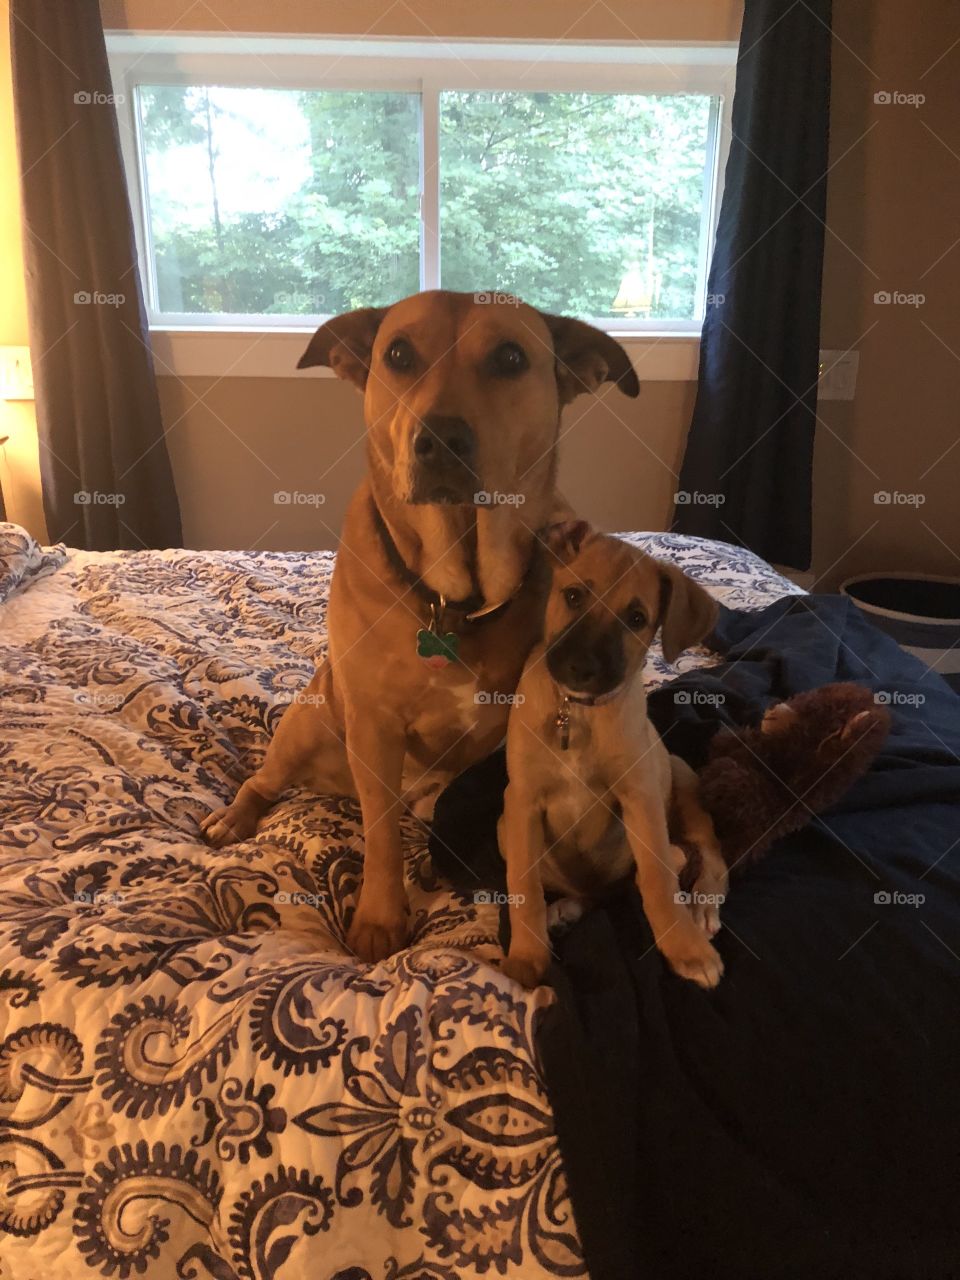 Best buddies- live from her new mommy